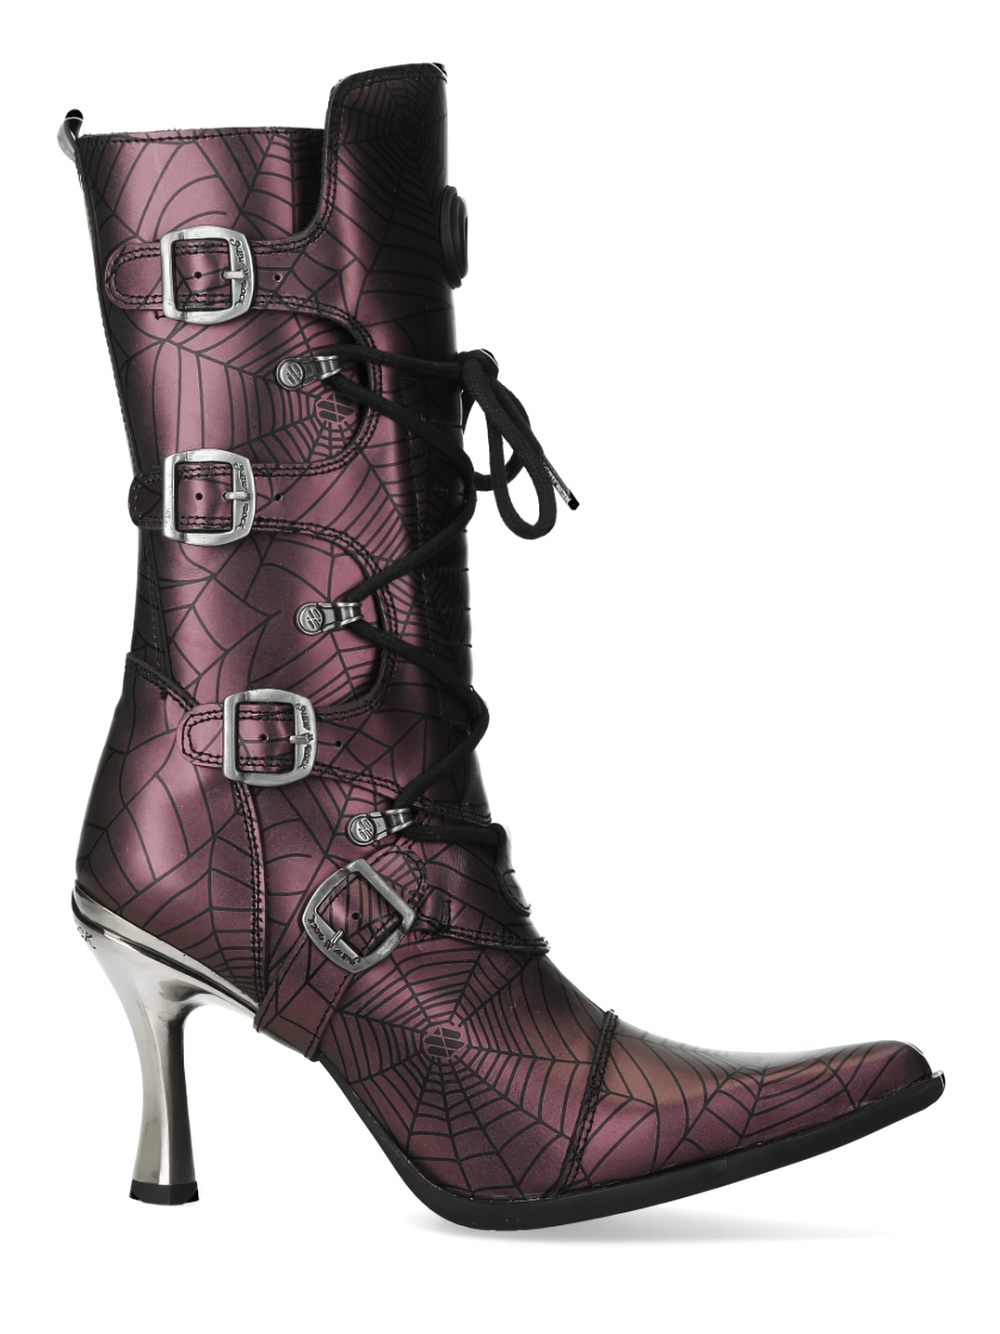 NEW ROCK Punk Rock Lace-Up Boots with Metallic Heels